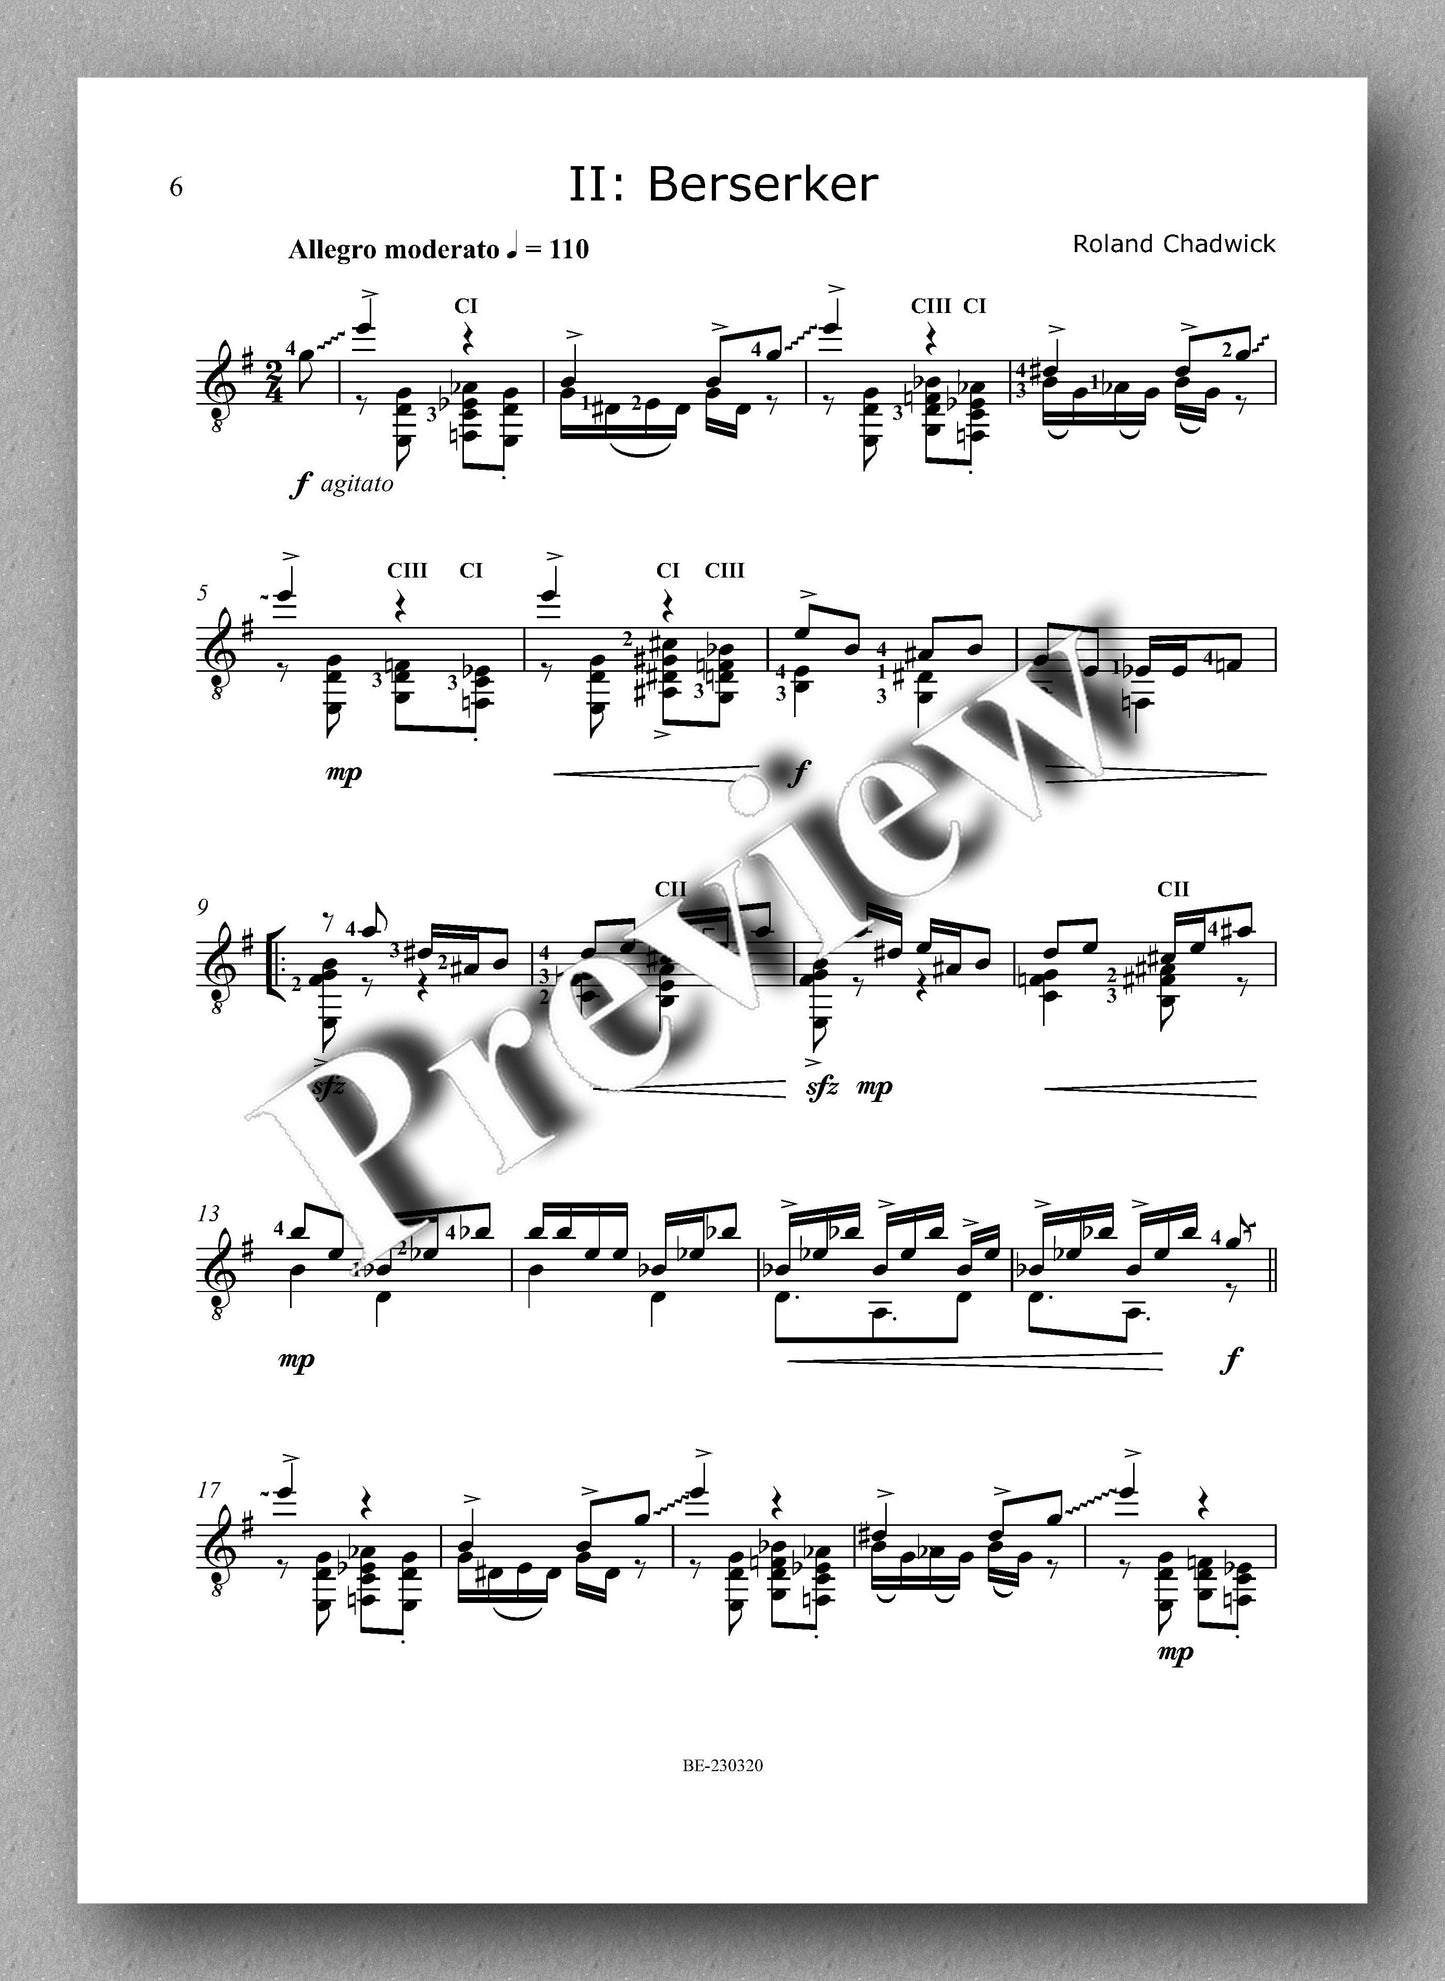 Roland Chadwick - The Soldier - preview of the music score 2